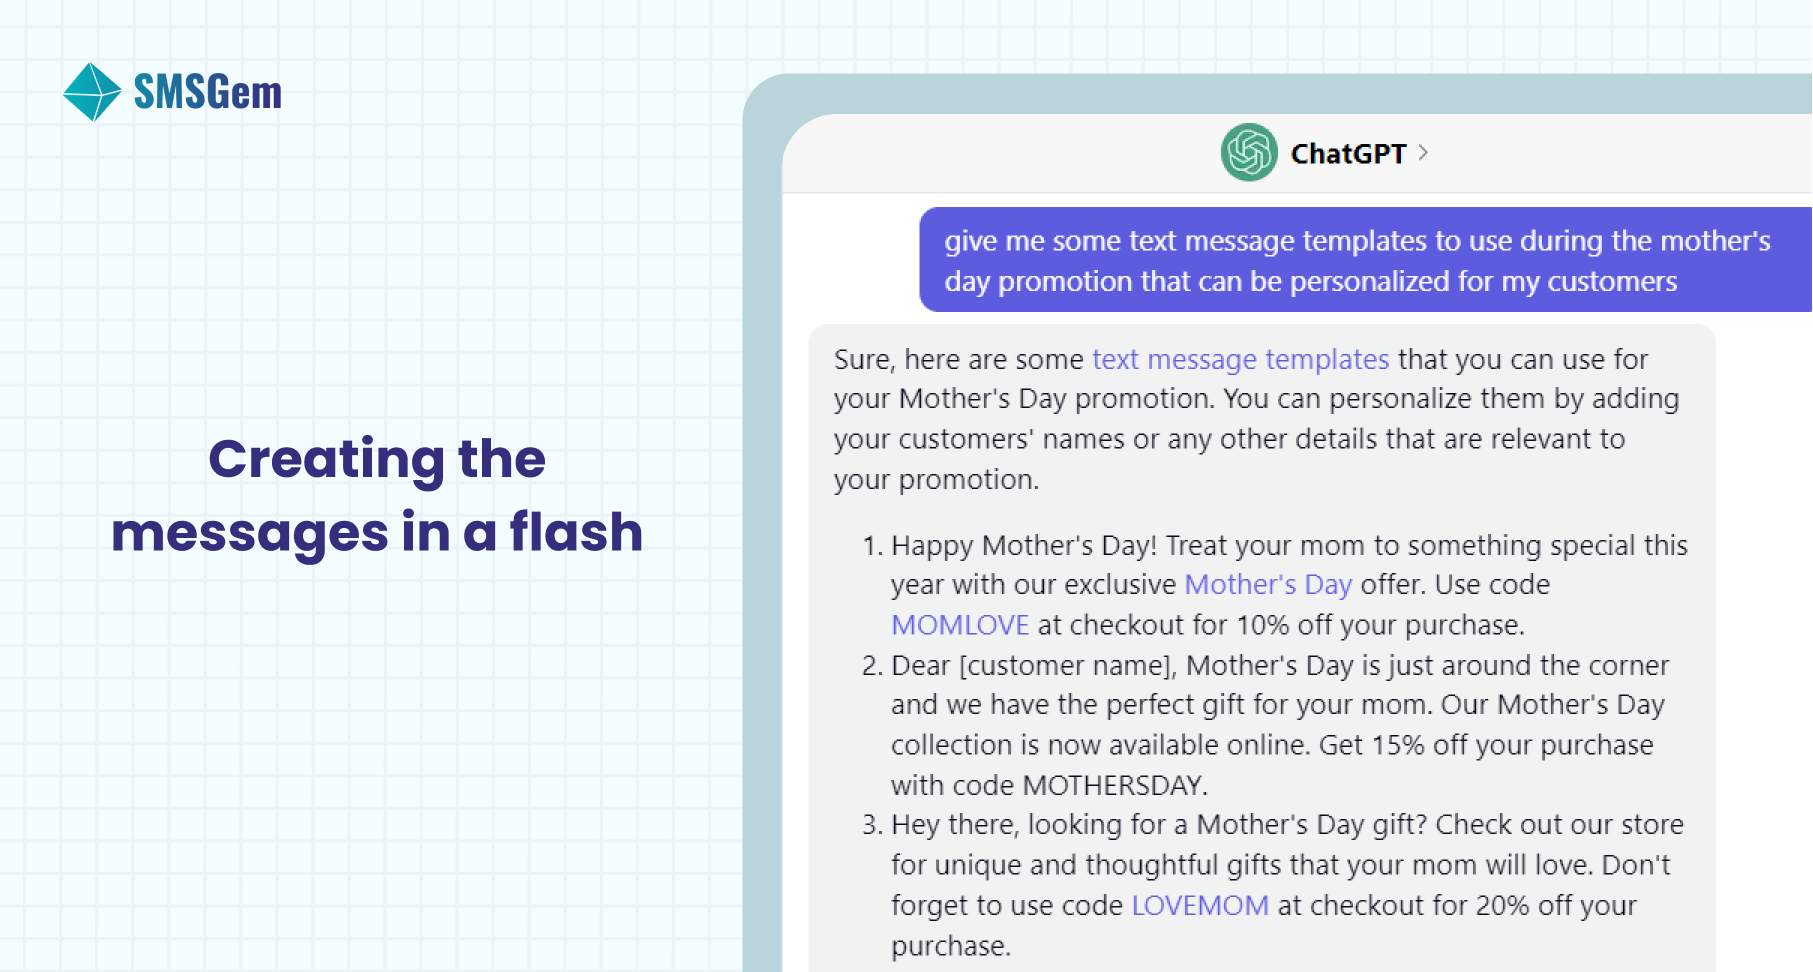 ChatGPT generates text templates for SMS Marketing